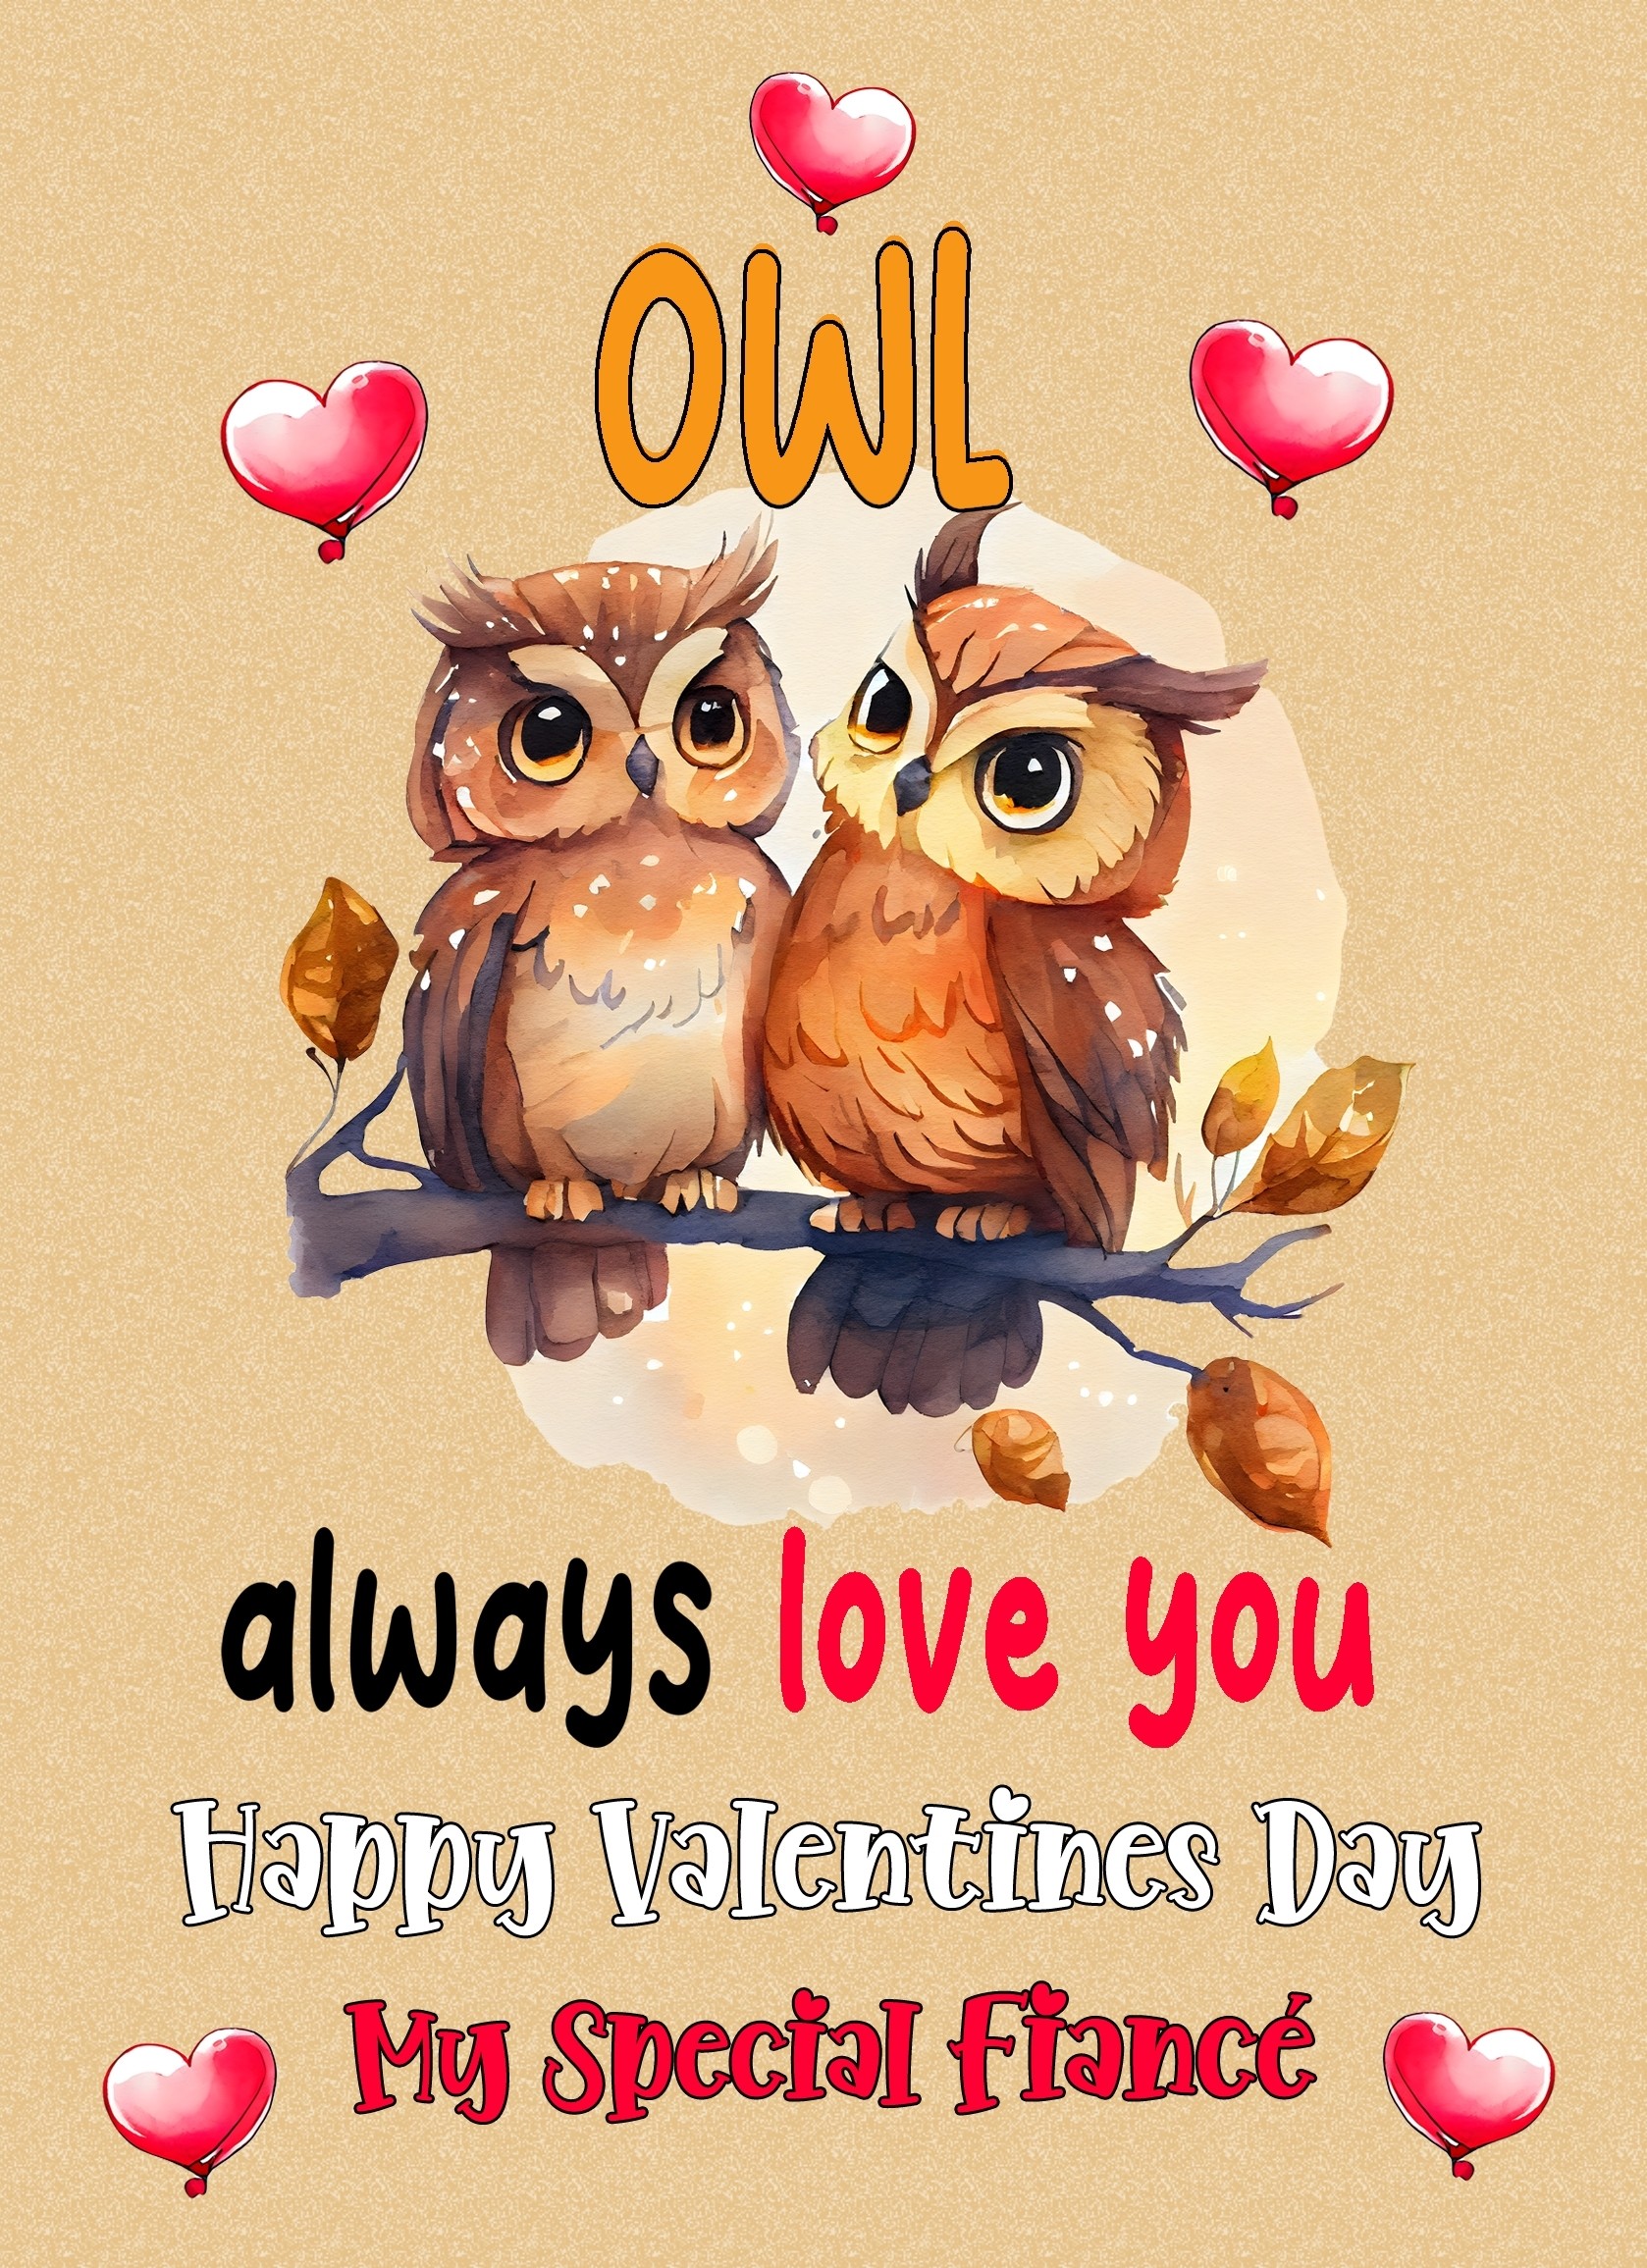 Funny Pun Valentines Day Card for Fiance (Owl Always Love You)